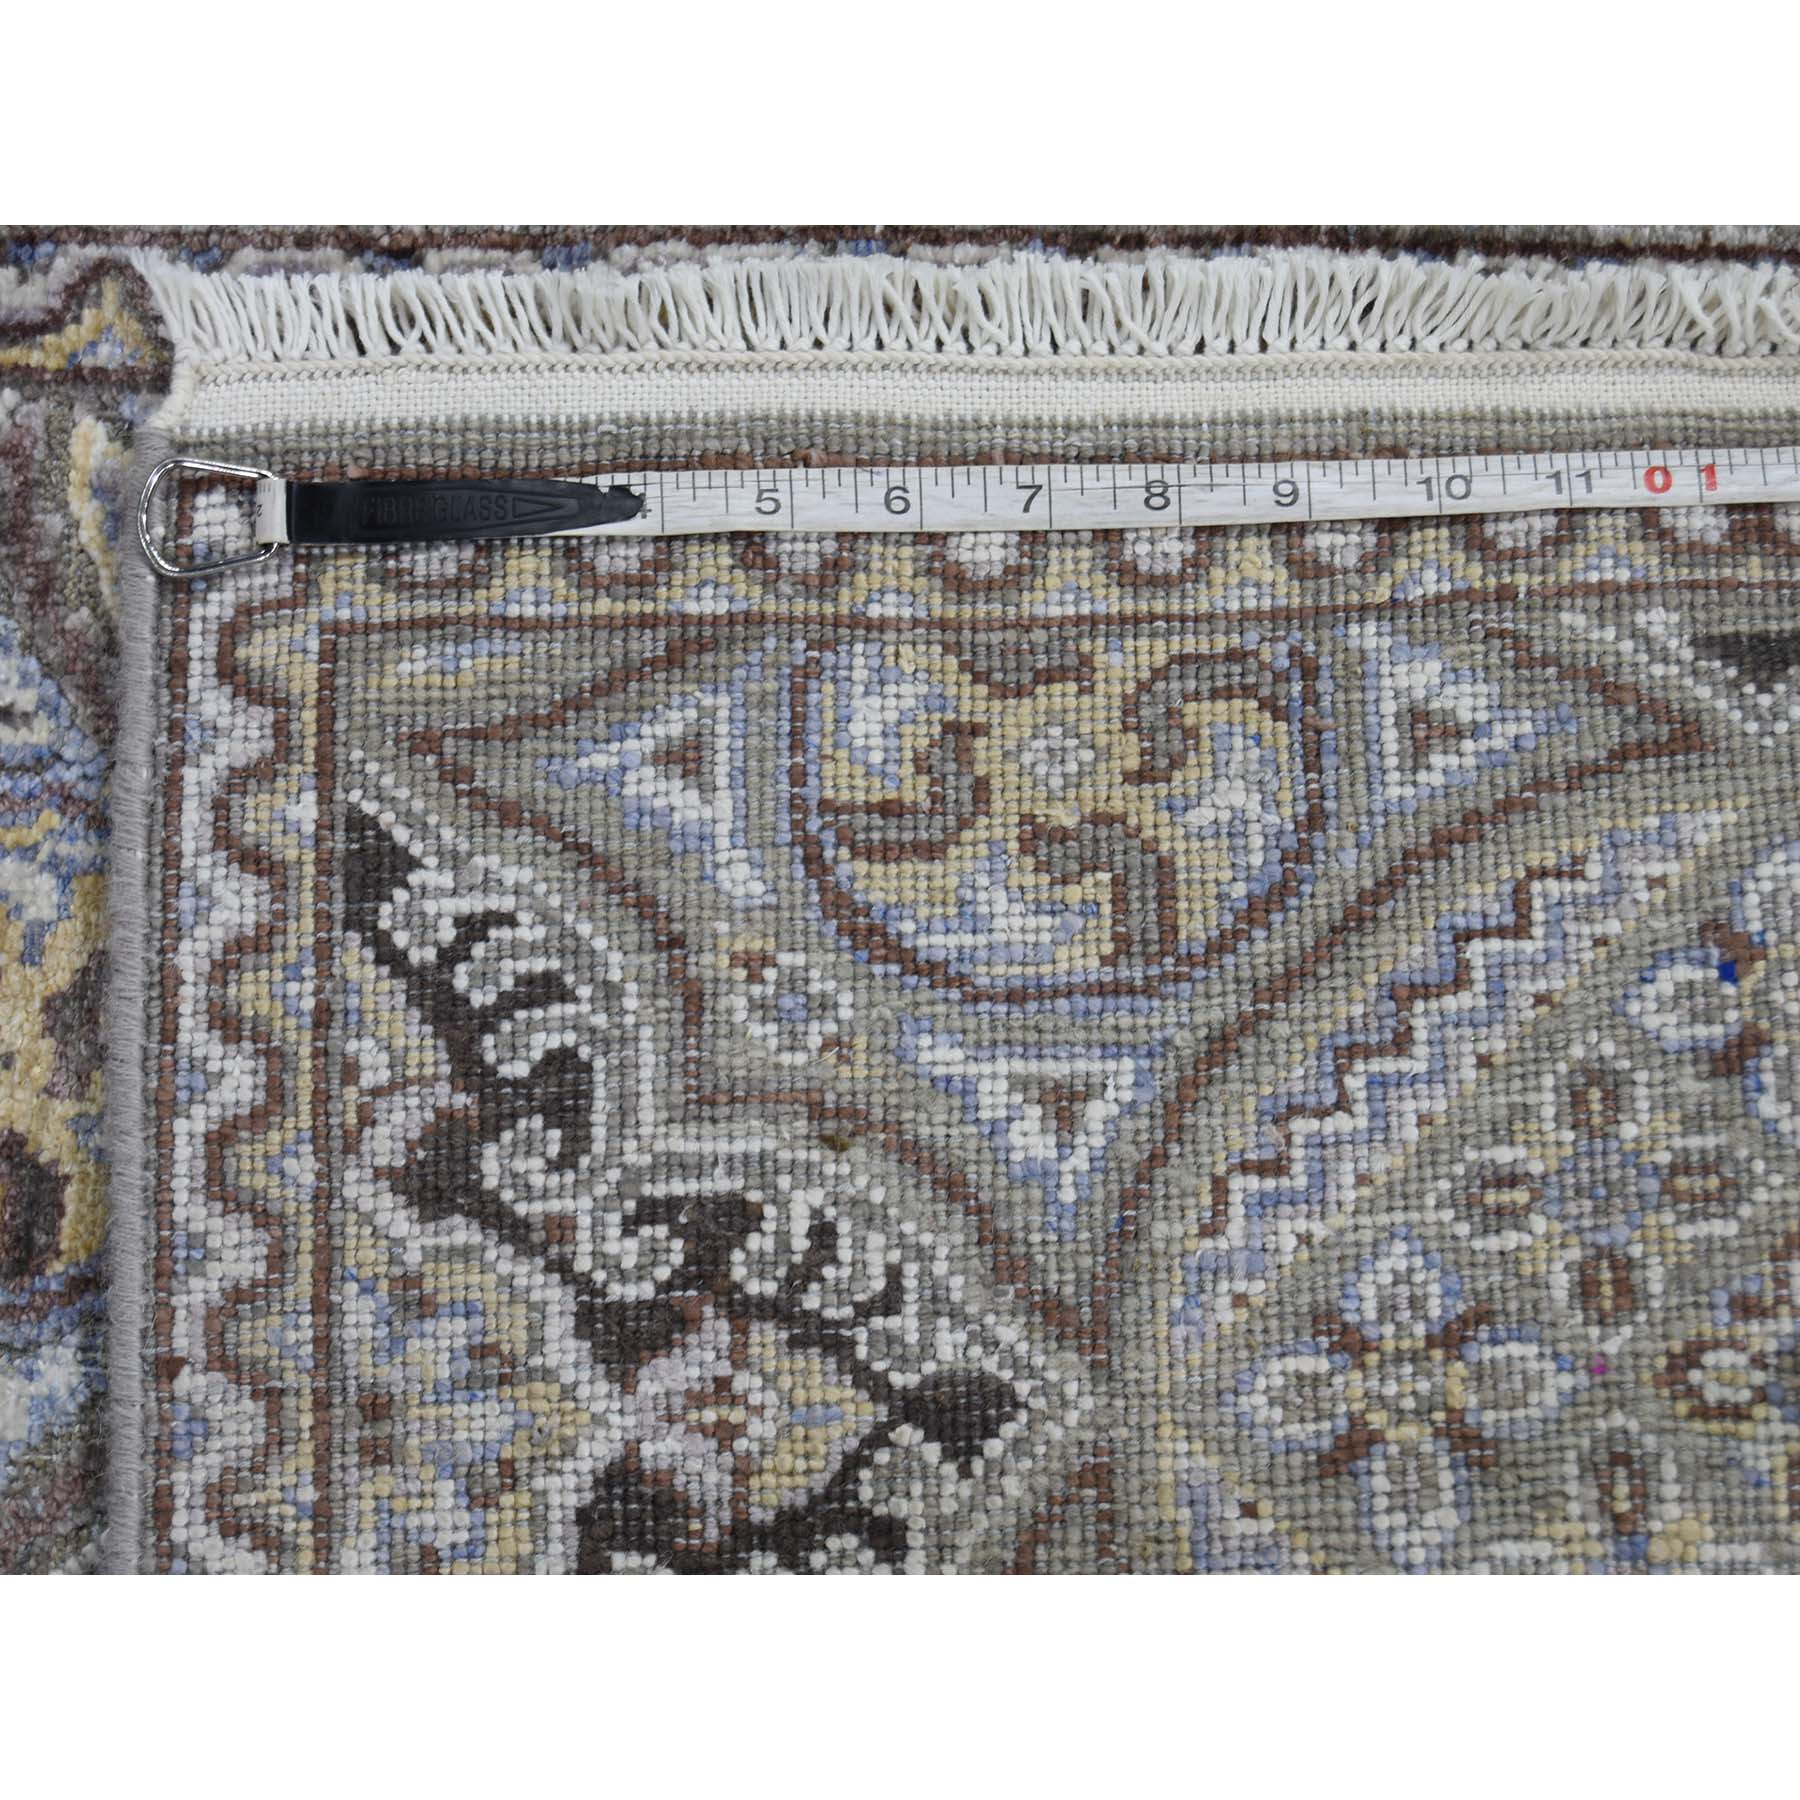 2'1"x3'1" Mughal Inspired Medallions Design Textured Wool and Silk Hand Woven Oriental Rug 